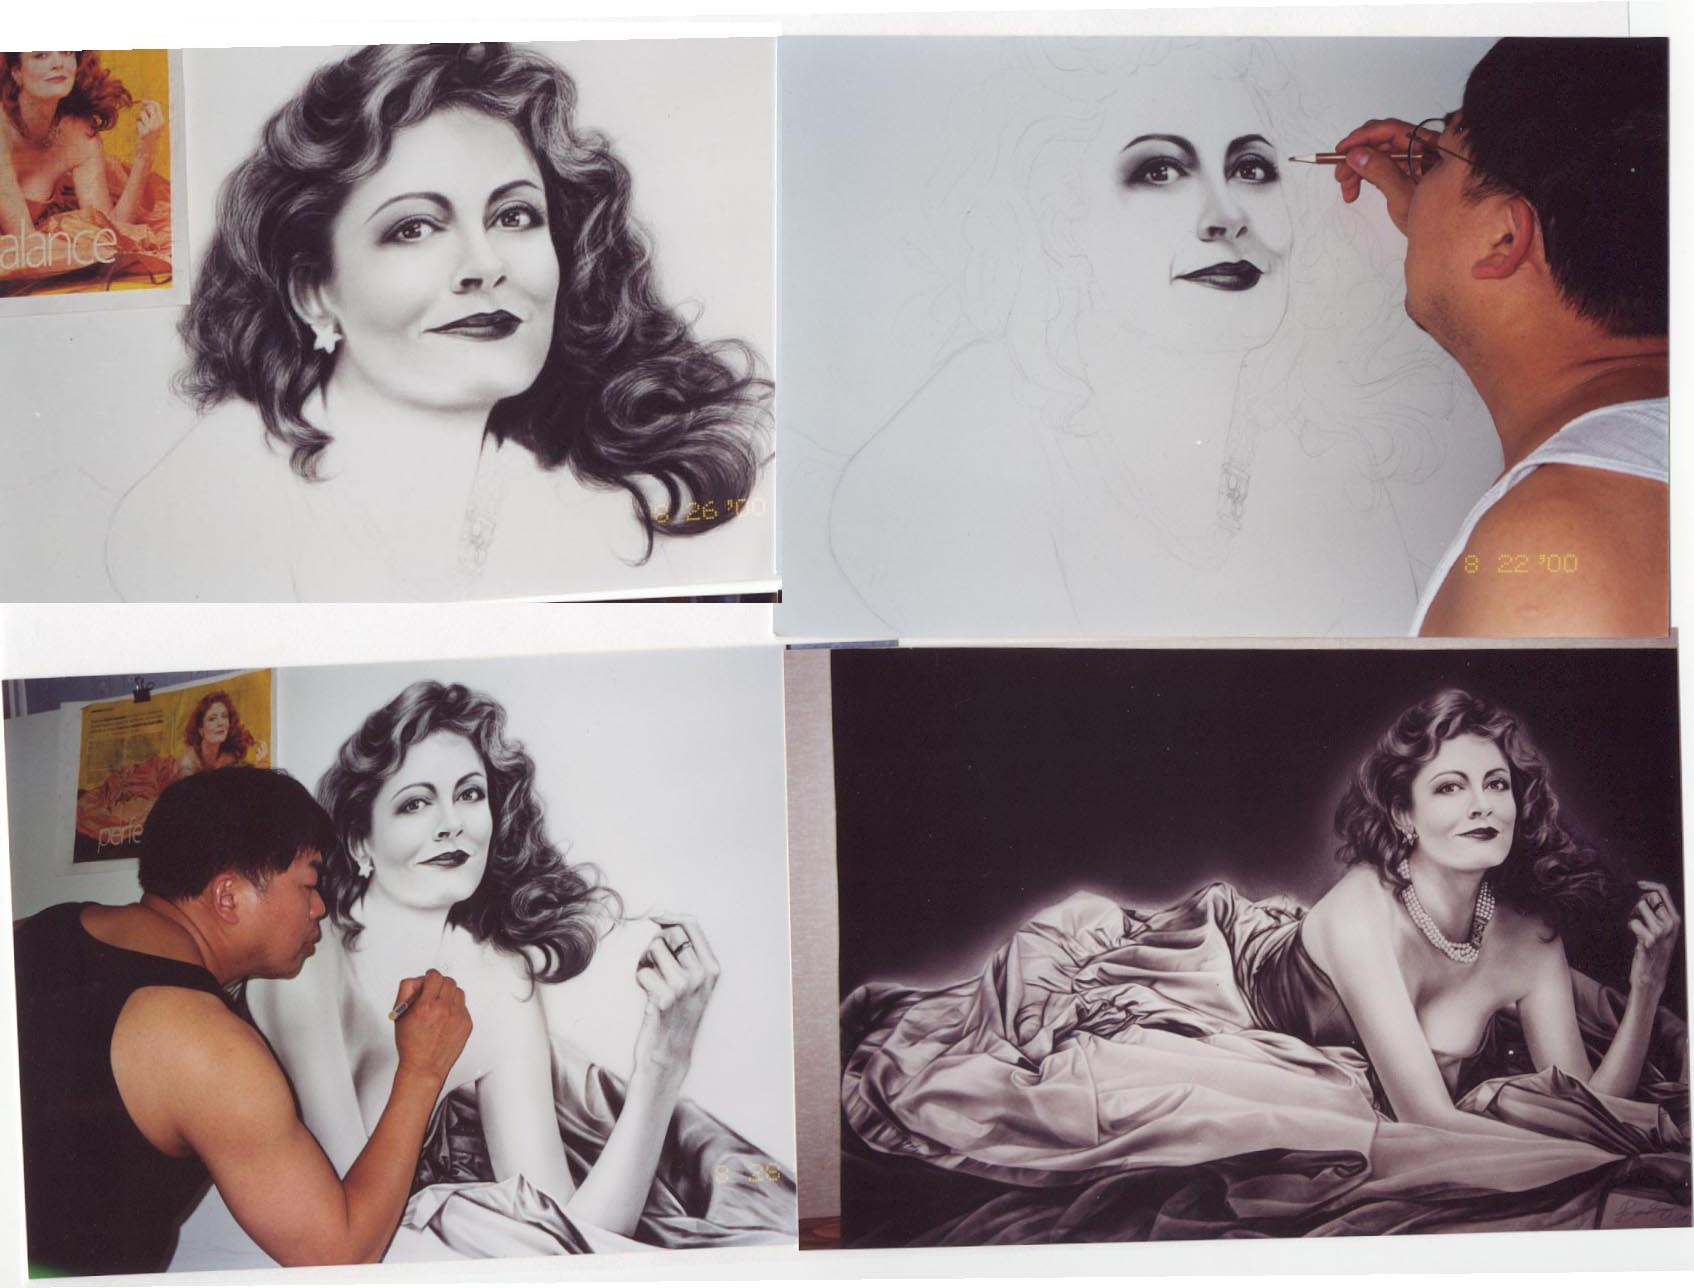 Here are 4 pictures of Susan Surandon being drawn